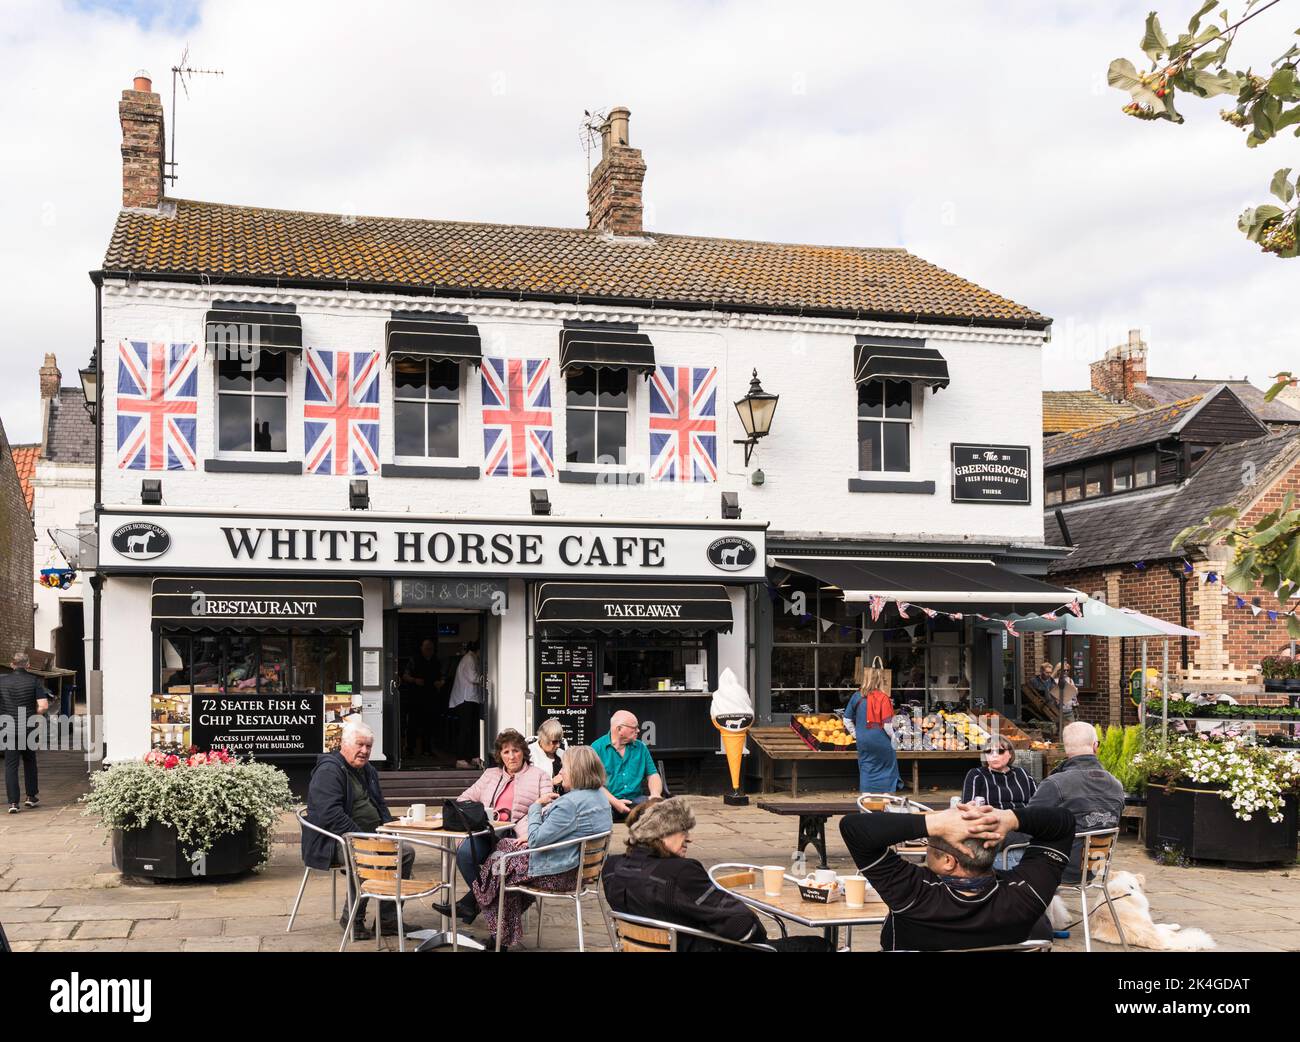 People sitting outside the White Horse Café in Thirsk market place, North Yorkshire, England, UK Stock Photo